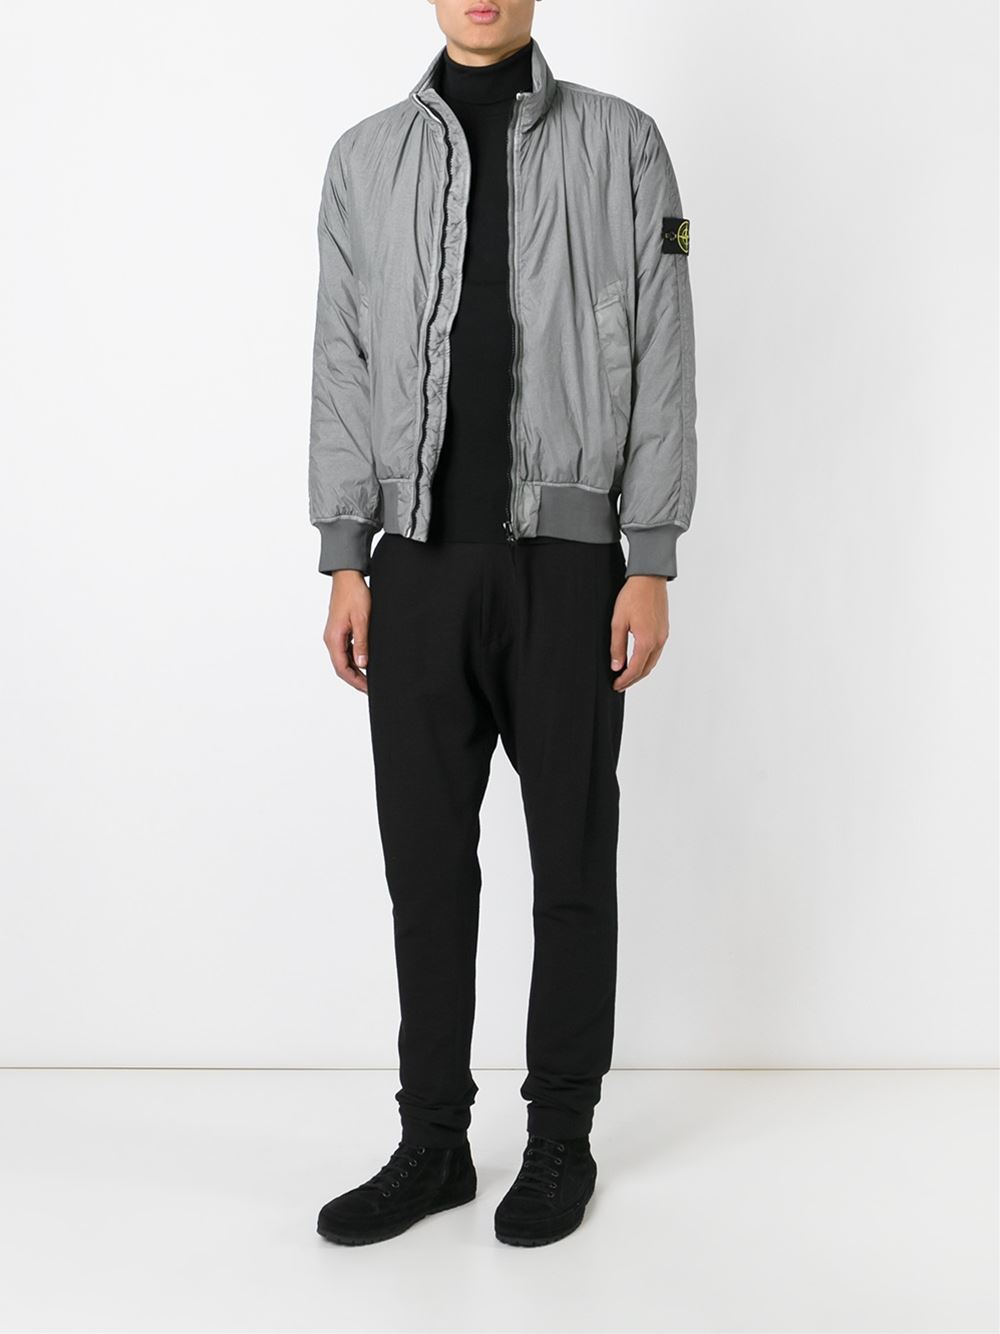 Stone Island Padded Bomber Jacket in Grey (Gray) for Men | Lyst